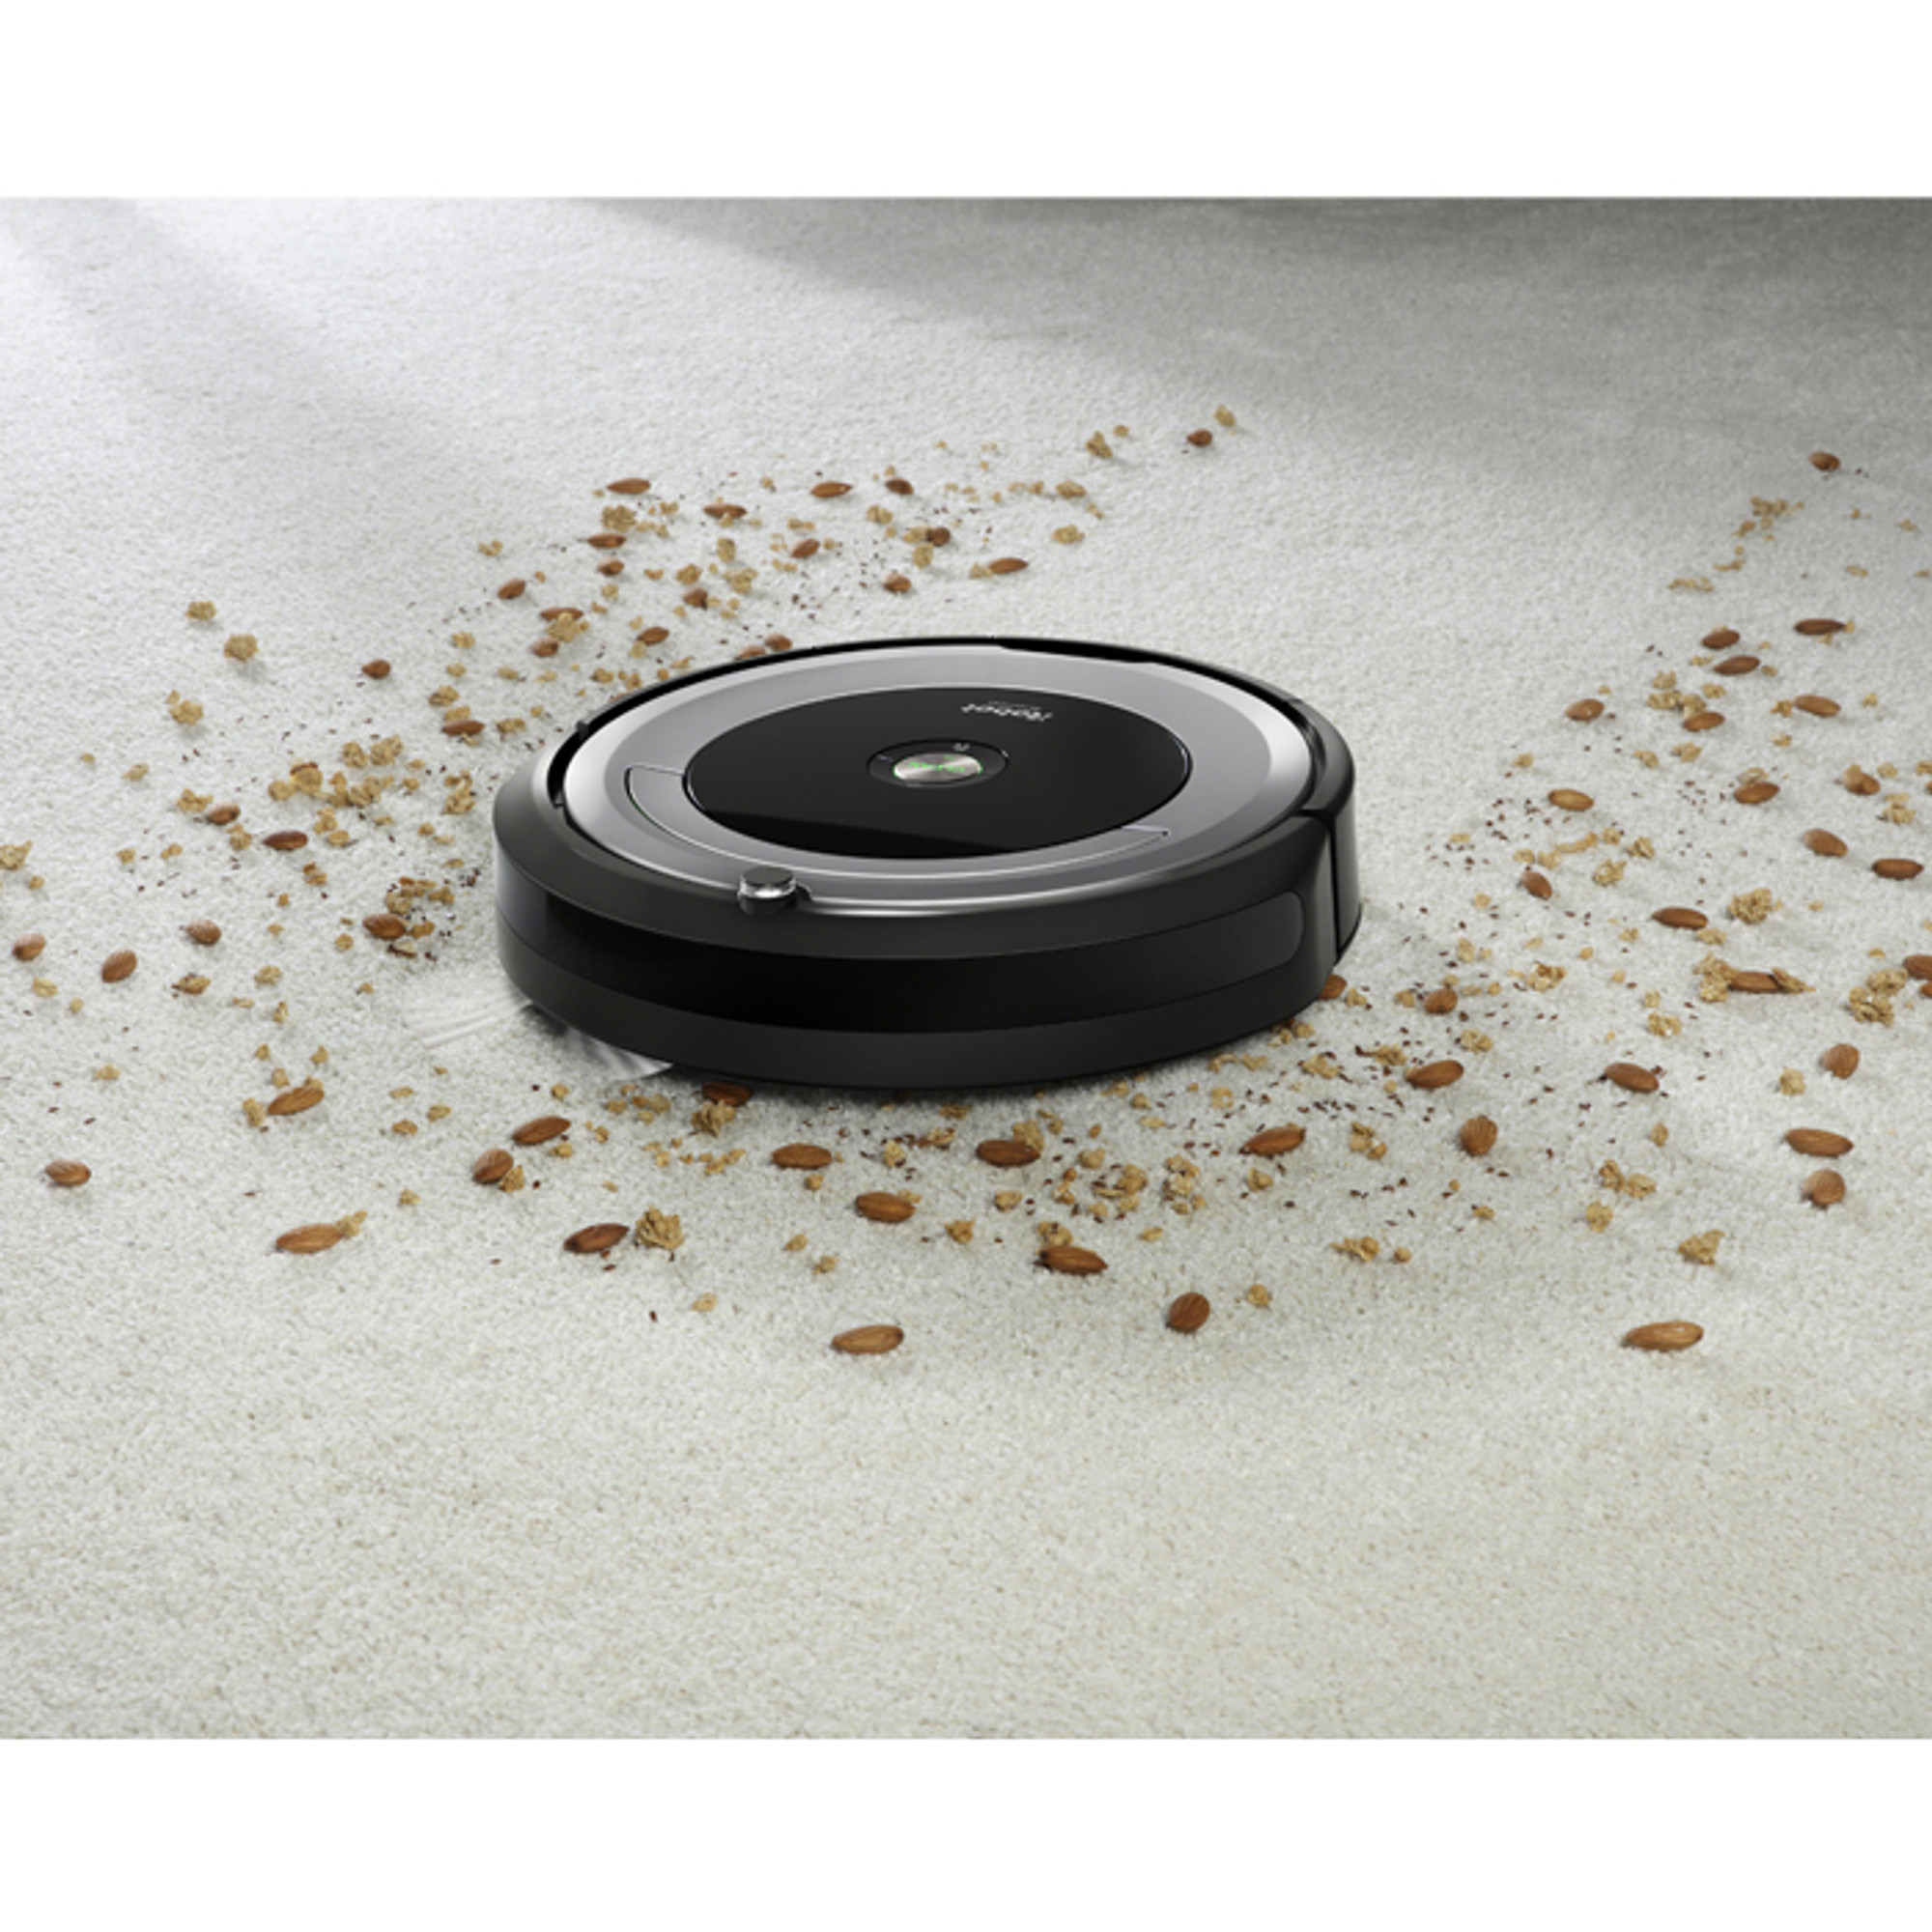 Buy Roomba 690 Robot Vacuum Cleaner from Canada at ...